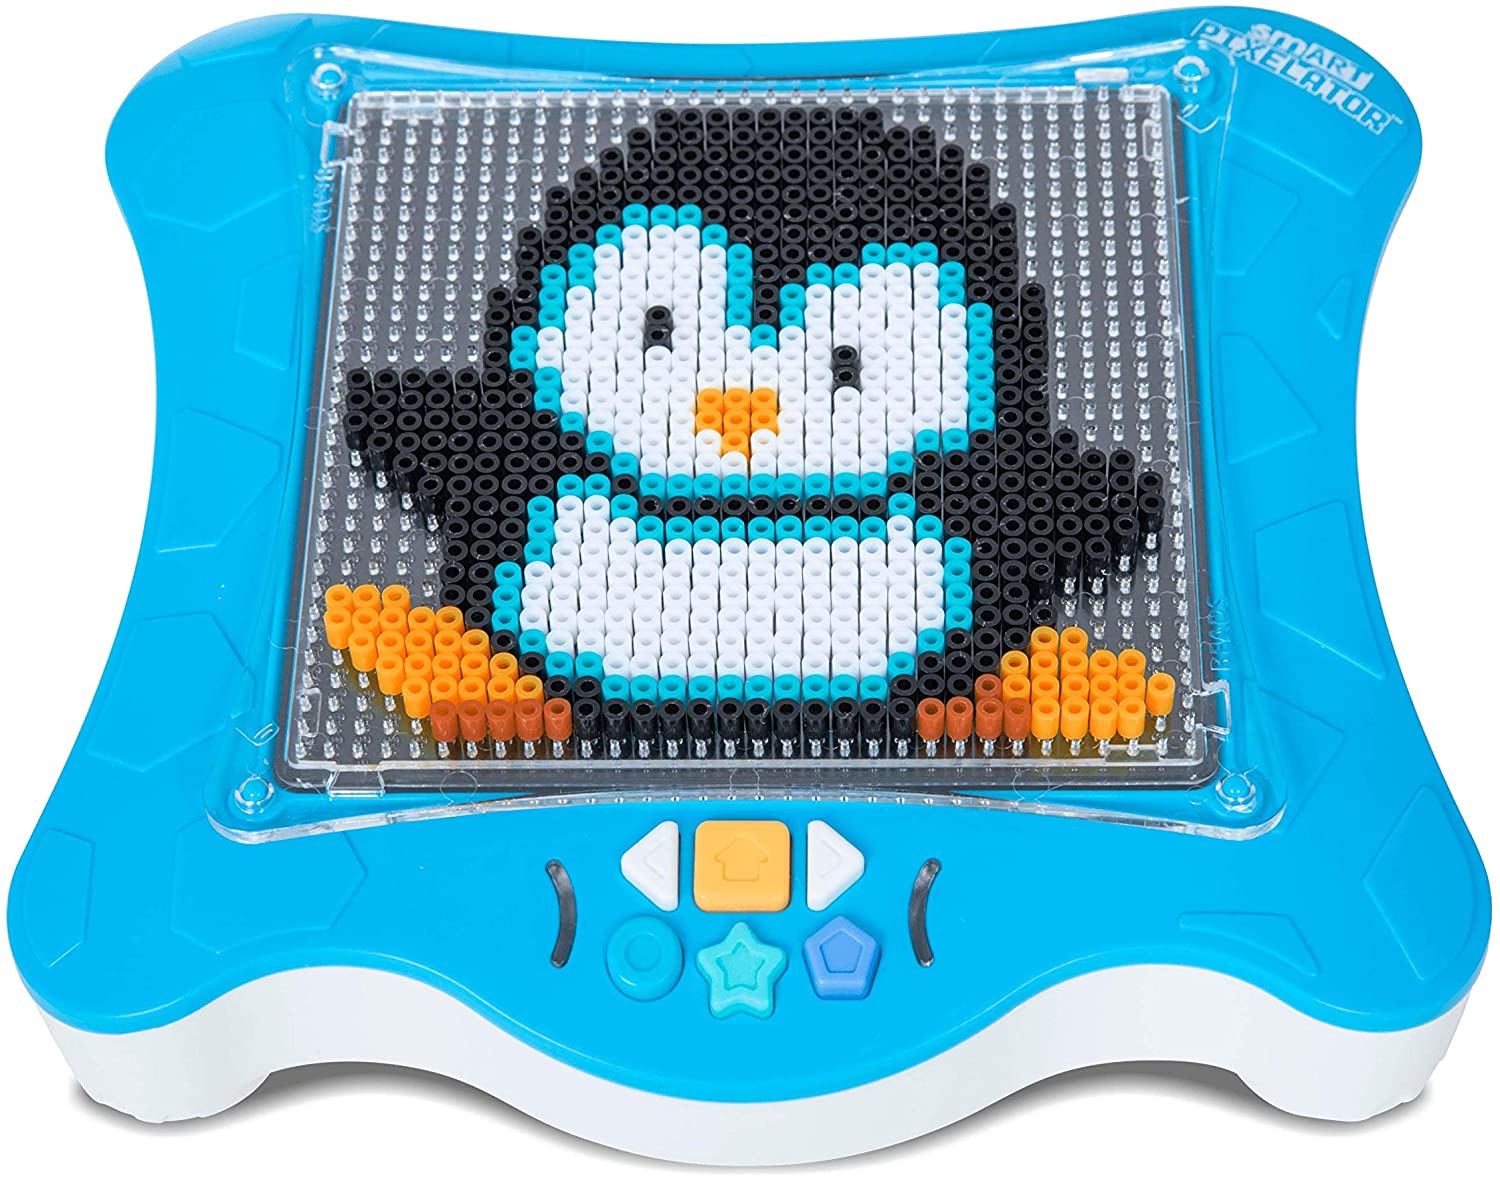 smART Pixelator: Create Your Own 3D Pixelated Art Projects, Gift for Kids, Ages 7+ - image 1 of 12